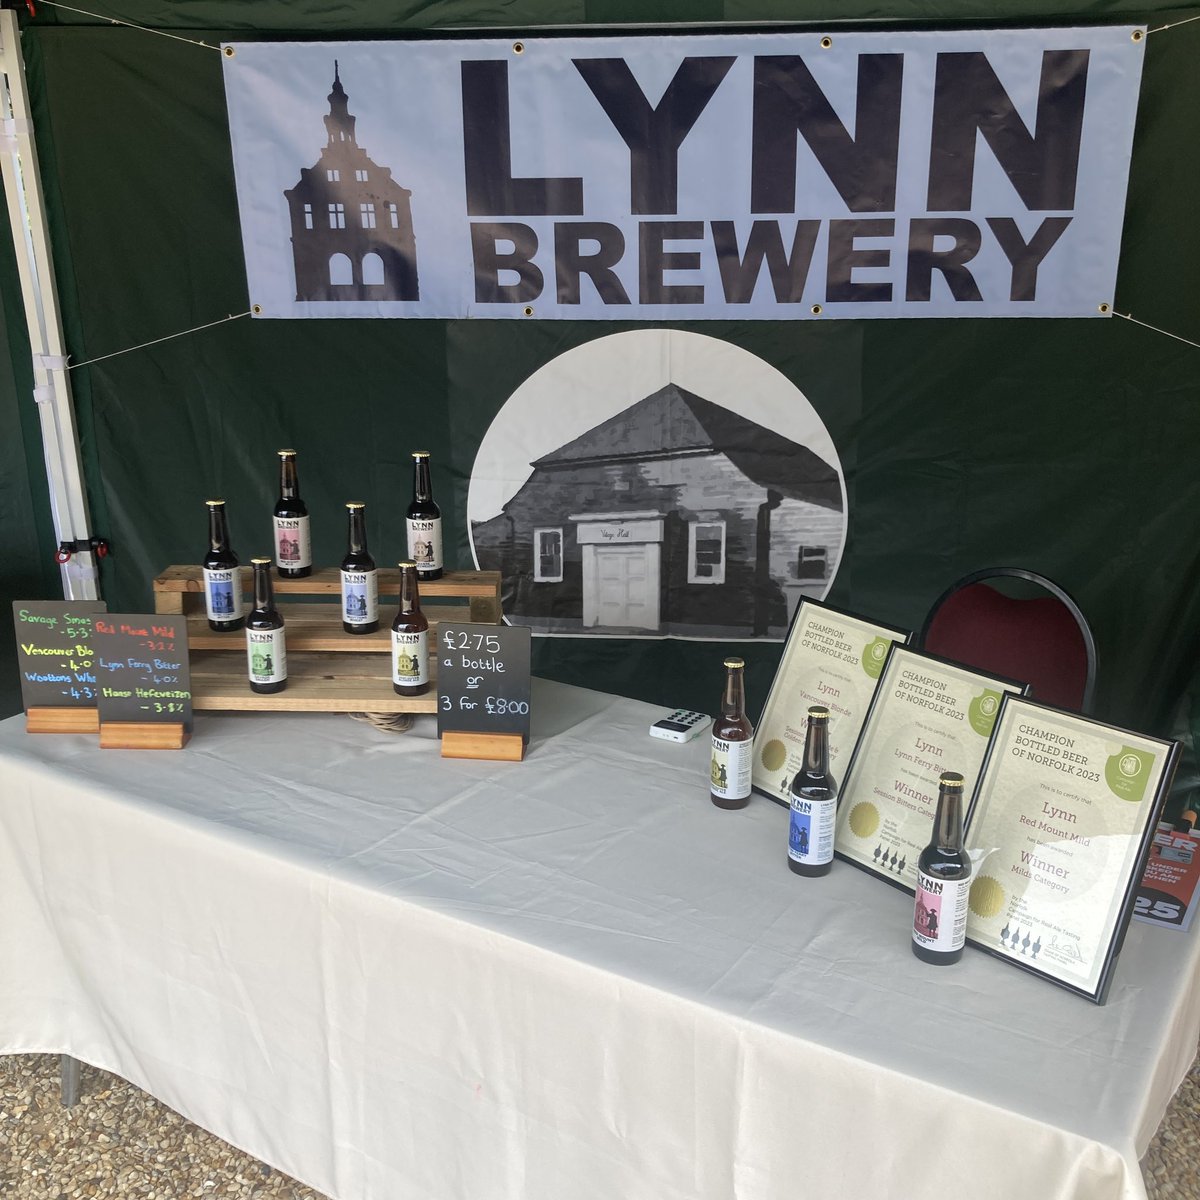 It’s Father’s Day tomorrow! Why not show your appreciation with some delicious local beer? We’re at North Wootton Village Hall, and we’ll be here until 2pm. Hope to see you later!
#kingslynn #northwoottonvillagehall #tribenorfolk #westnorfolk #localfoodmarket